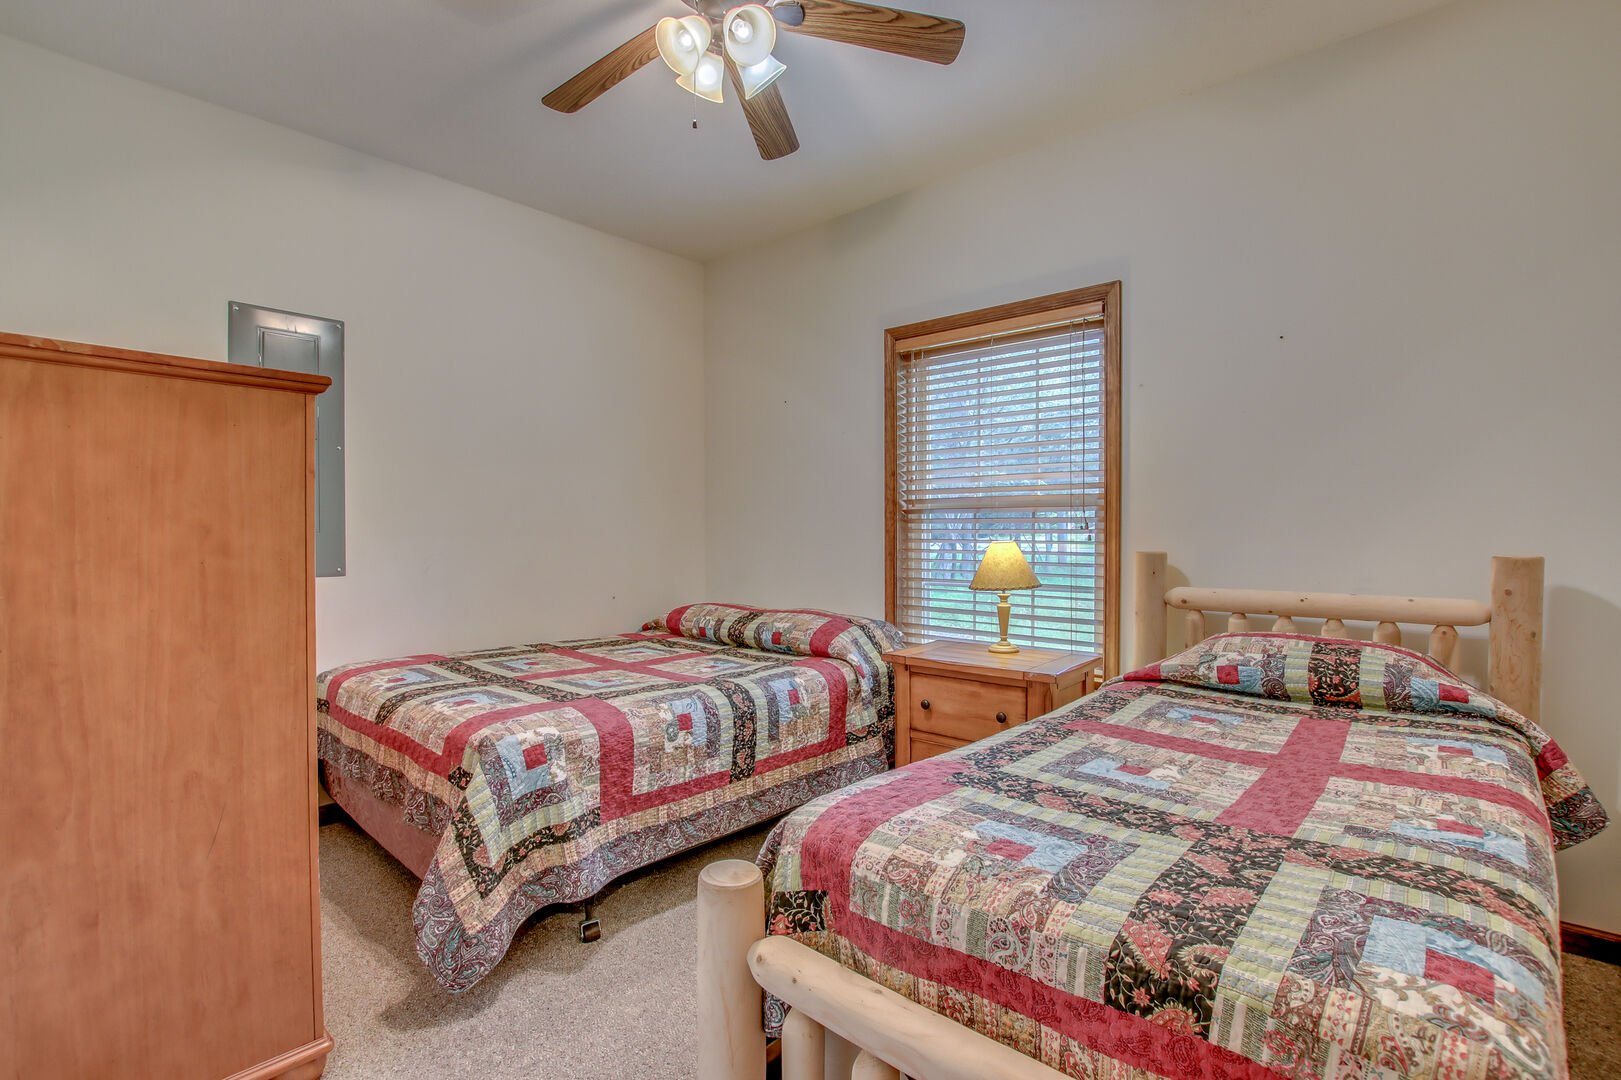 Bedroom with Two Beds, Nightstand, Table Lamp, Dresser, and Ceiling Fan.